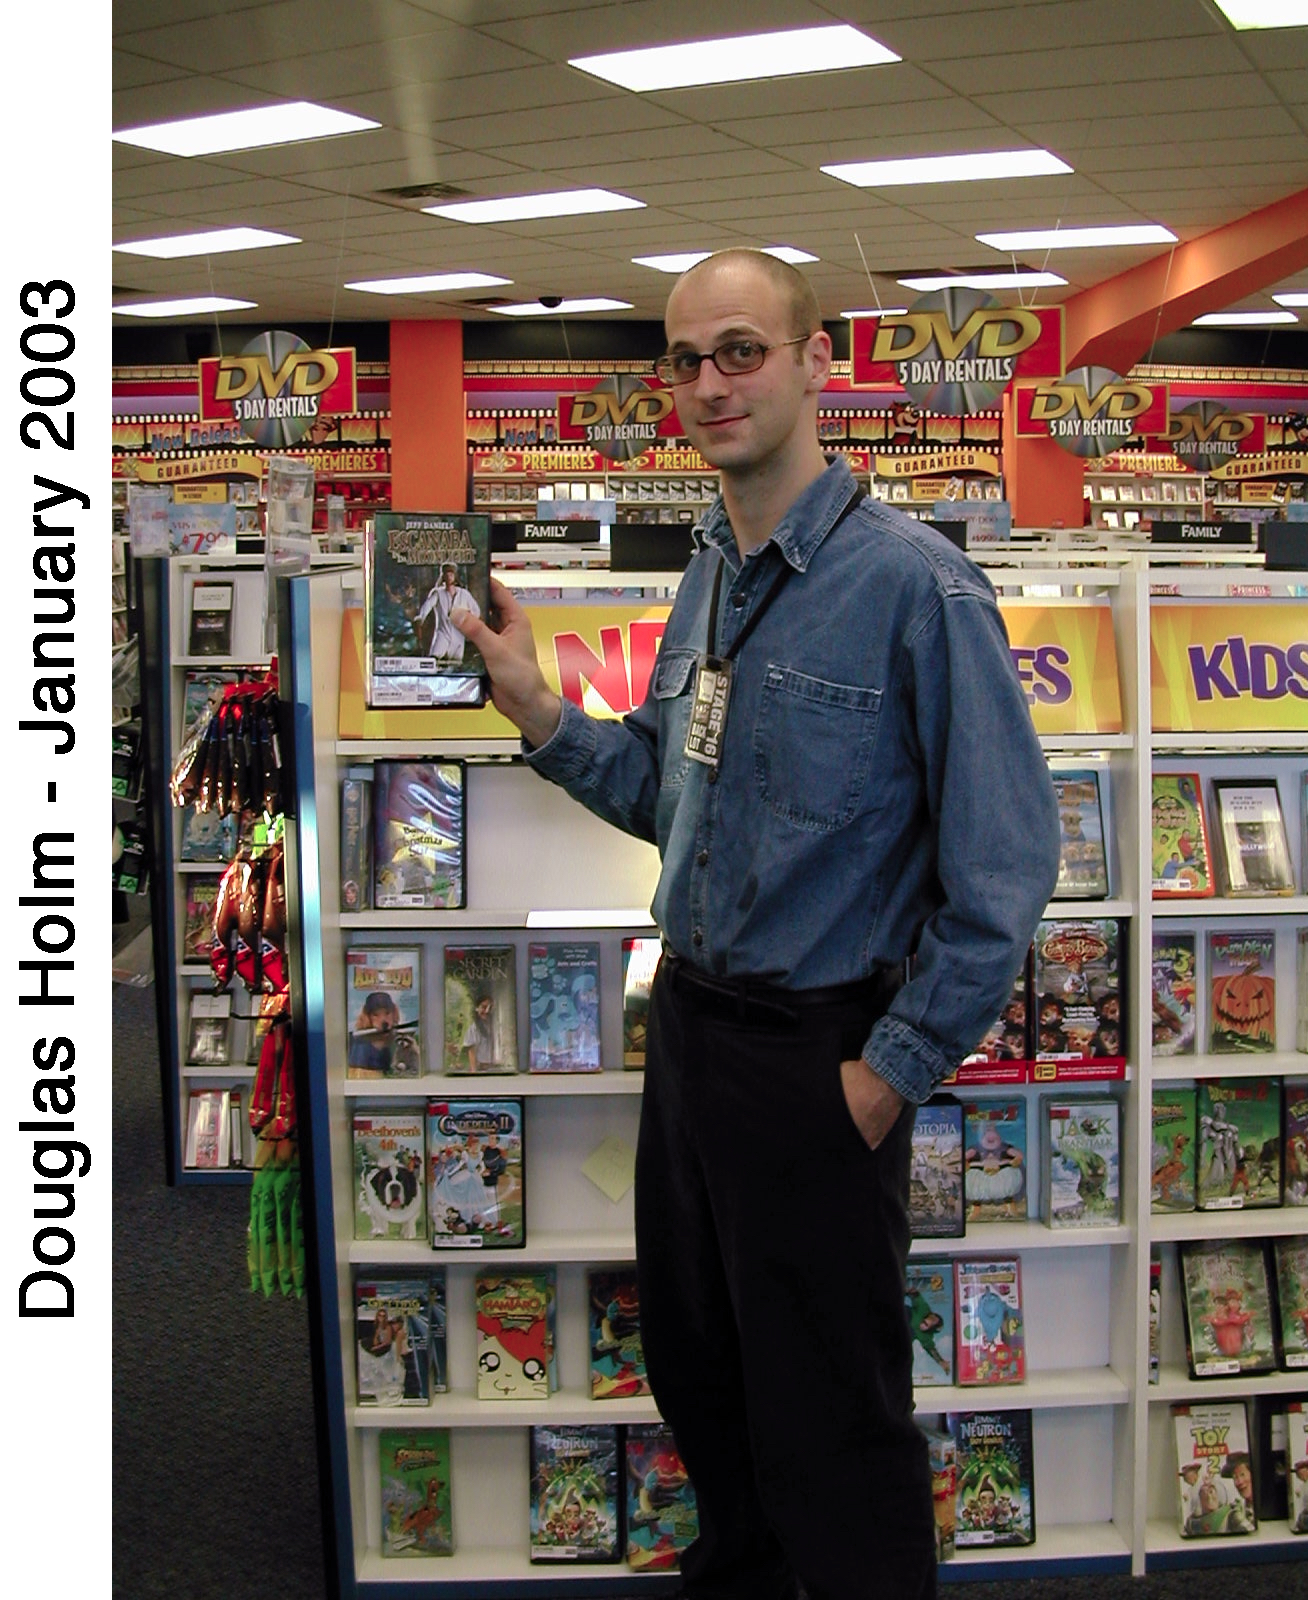 Doug Holm is standing next to shelves of videos and holding a box